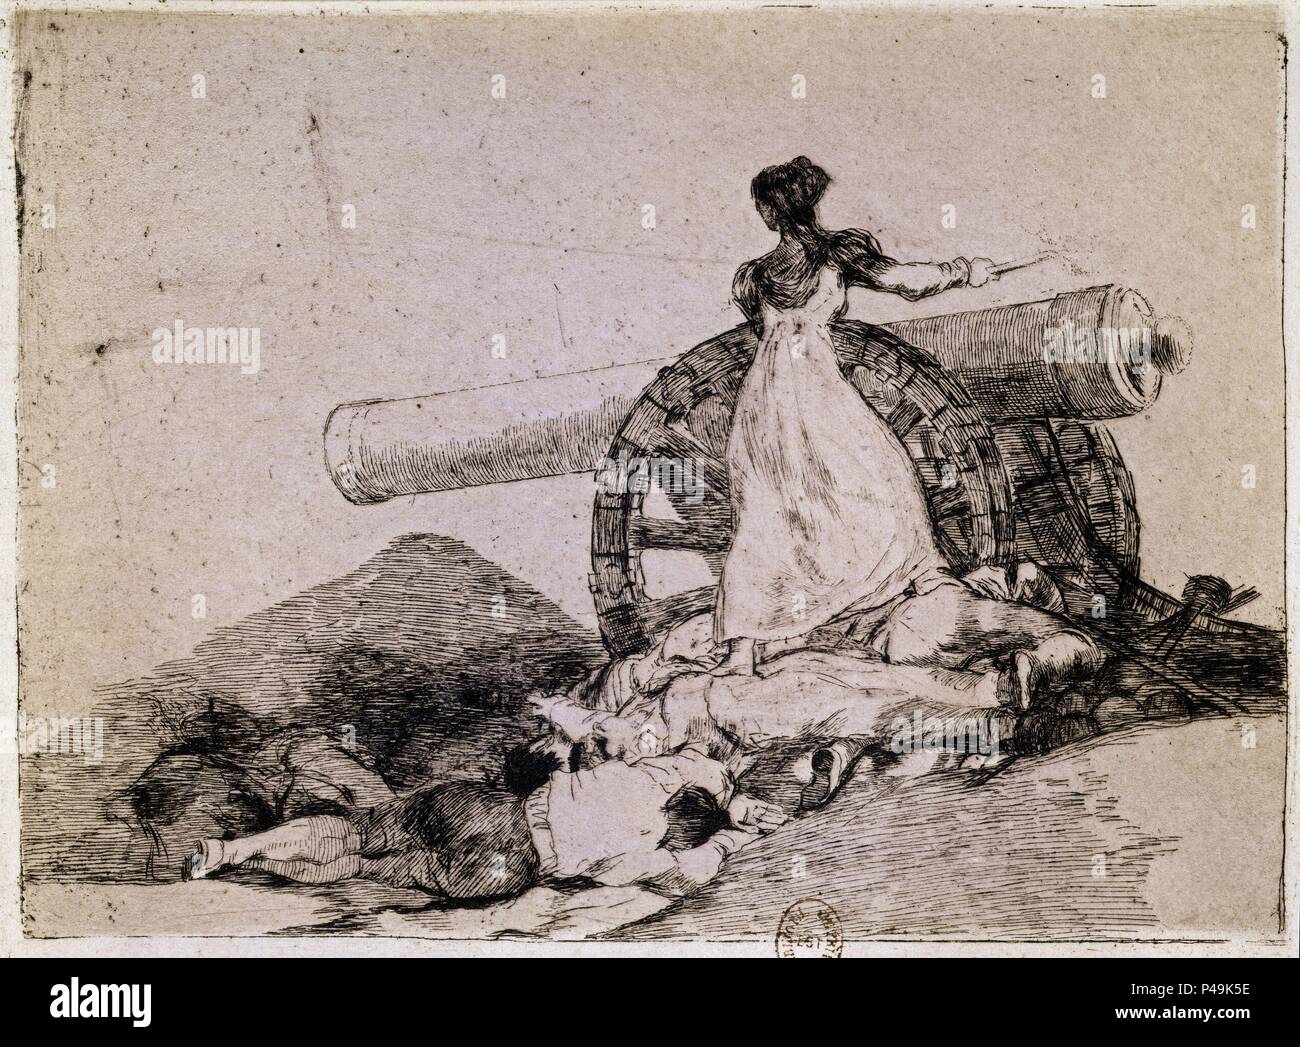 What courage!, plate 7 of 'The Disasters of War' (1810-1815), depicting Augustina of Aragon (d.1857) firing a cannon in defence of Saragossa in 1808 - 1863 - 15,8x20,9 cm- etching, aquatint, drypoint, burin and burnisher. Author: Francisco de Goya (1746-1828). Location: NATIONAL LIBRARY, FRANCE. Also known as: DESASTRES DE LA GUERRA (1810-1815) -DESASTRE Nº 7- ¡QUE VALOR!. Stock Photo